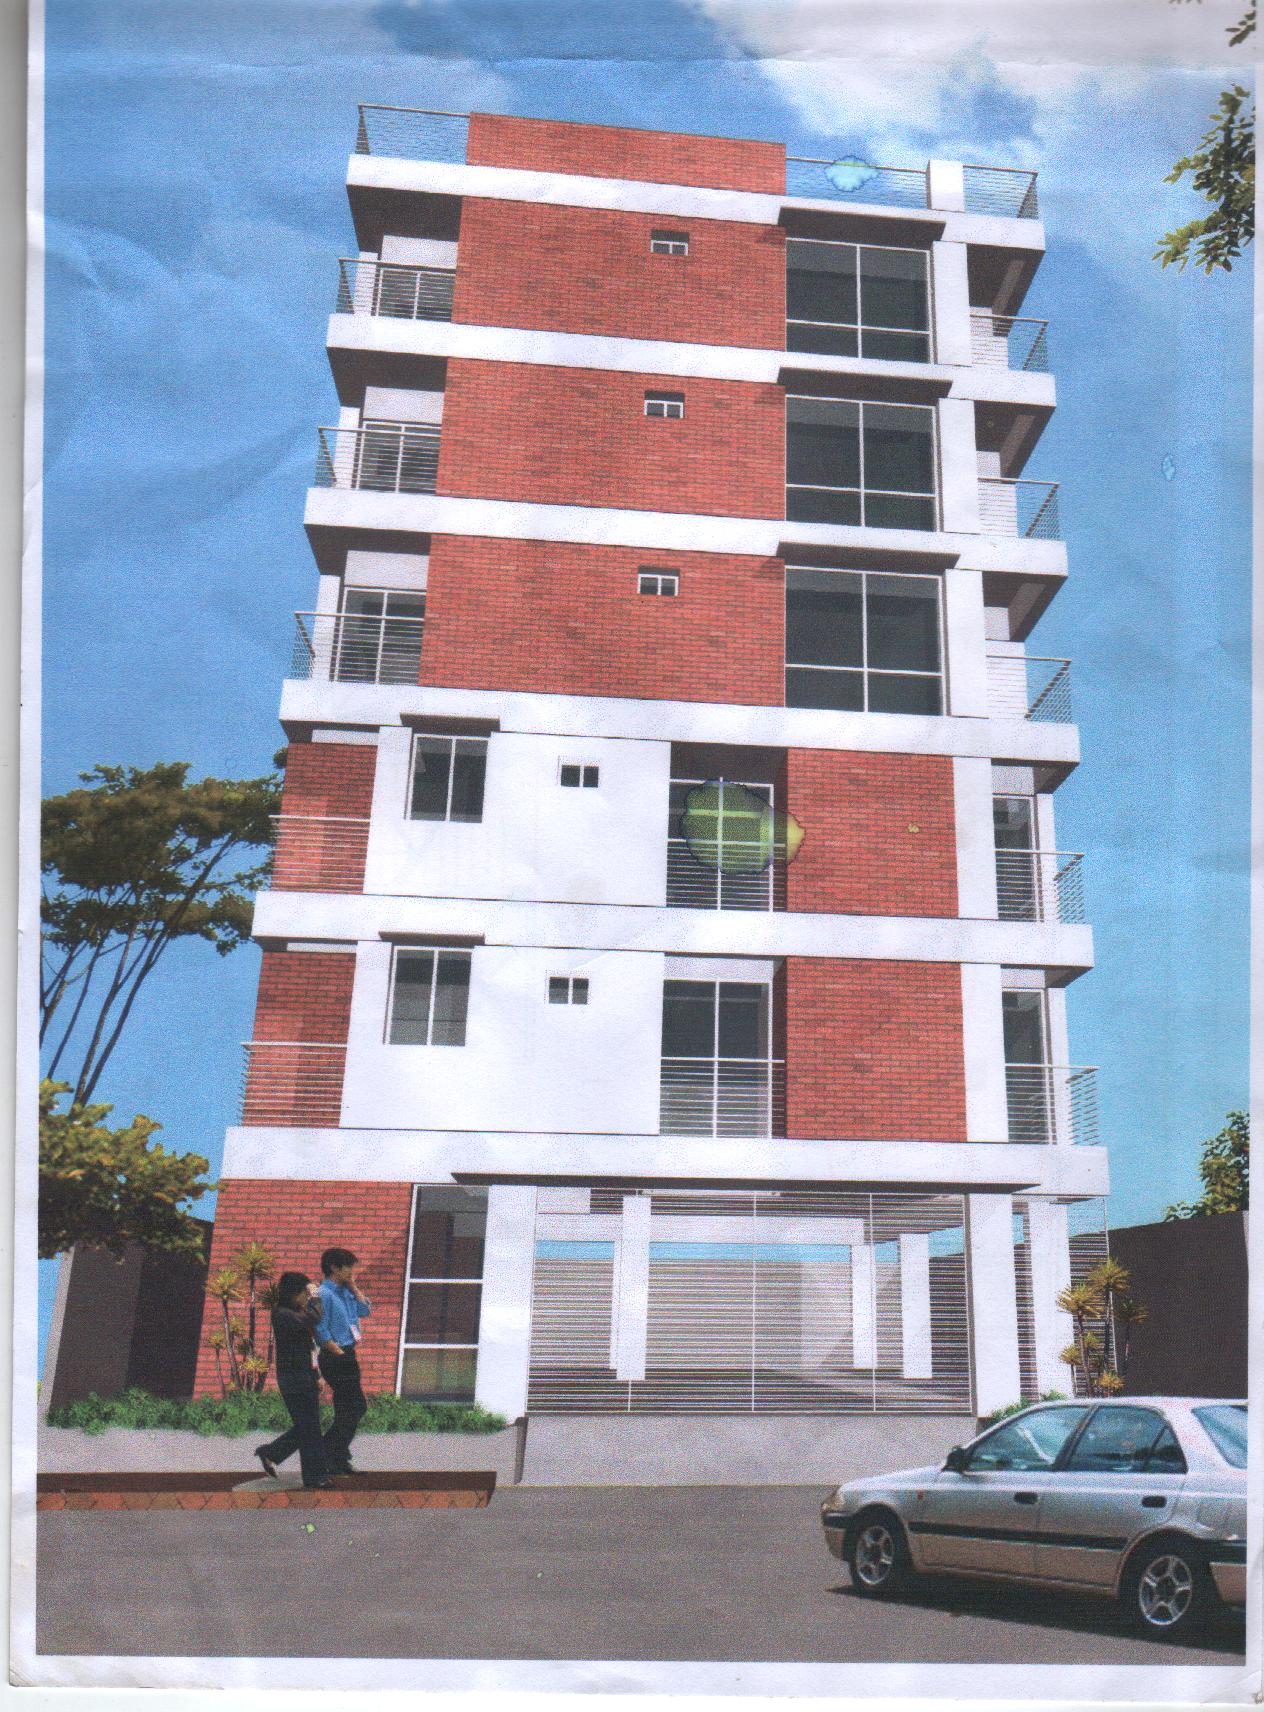 1100 sqft Ready Flat for Sale at Mirpur DOHS 6500 Tk Sq.ft  large image 0